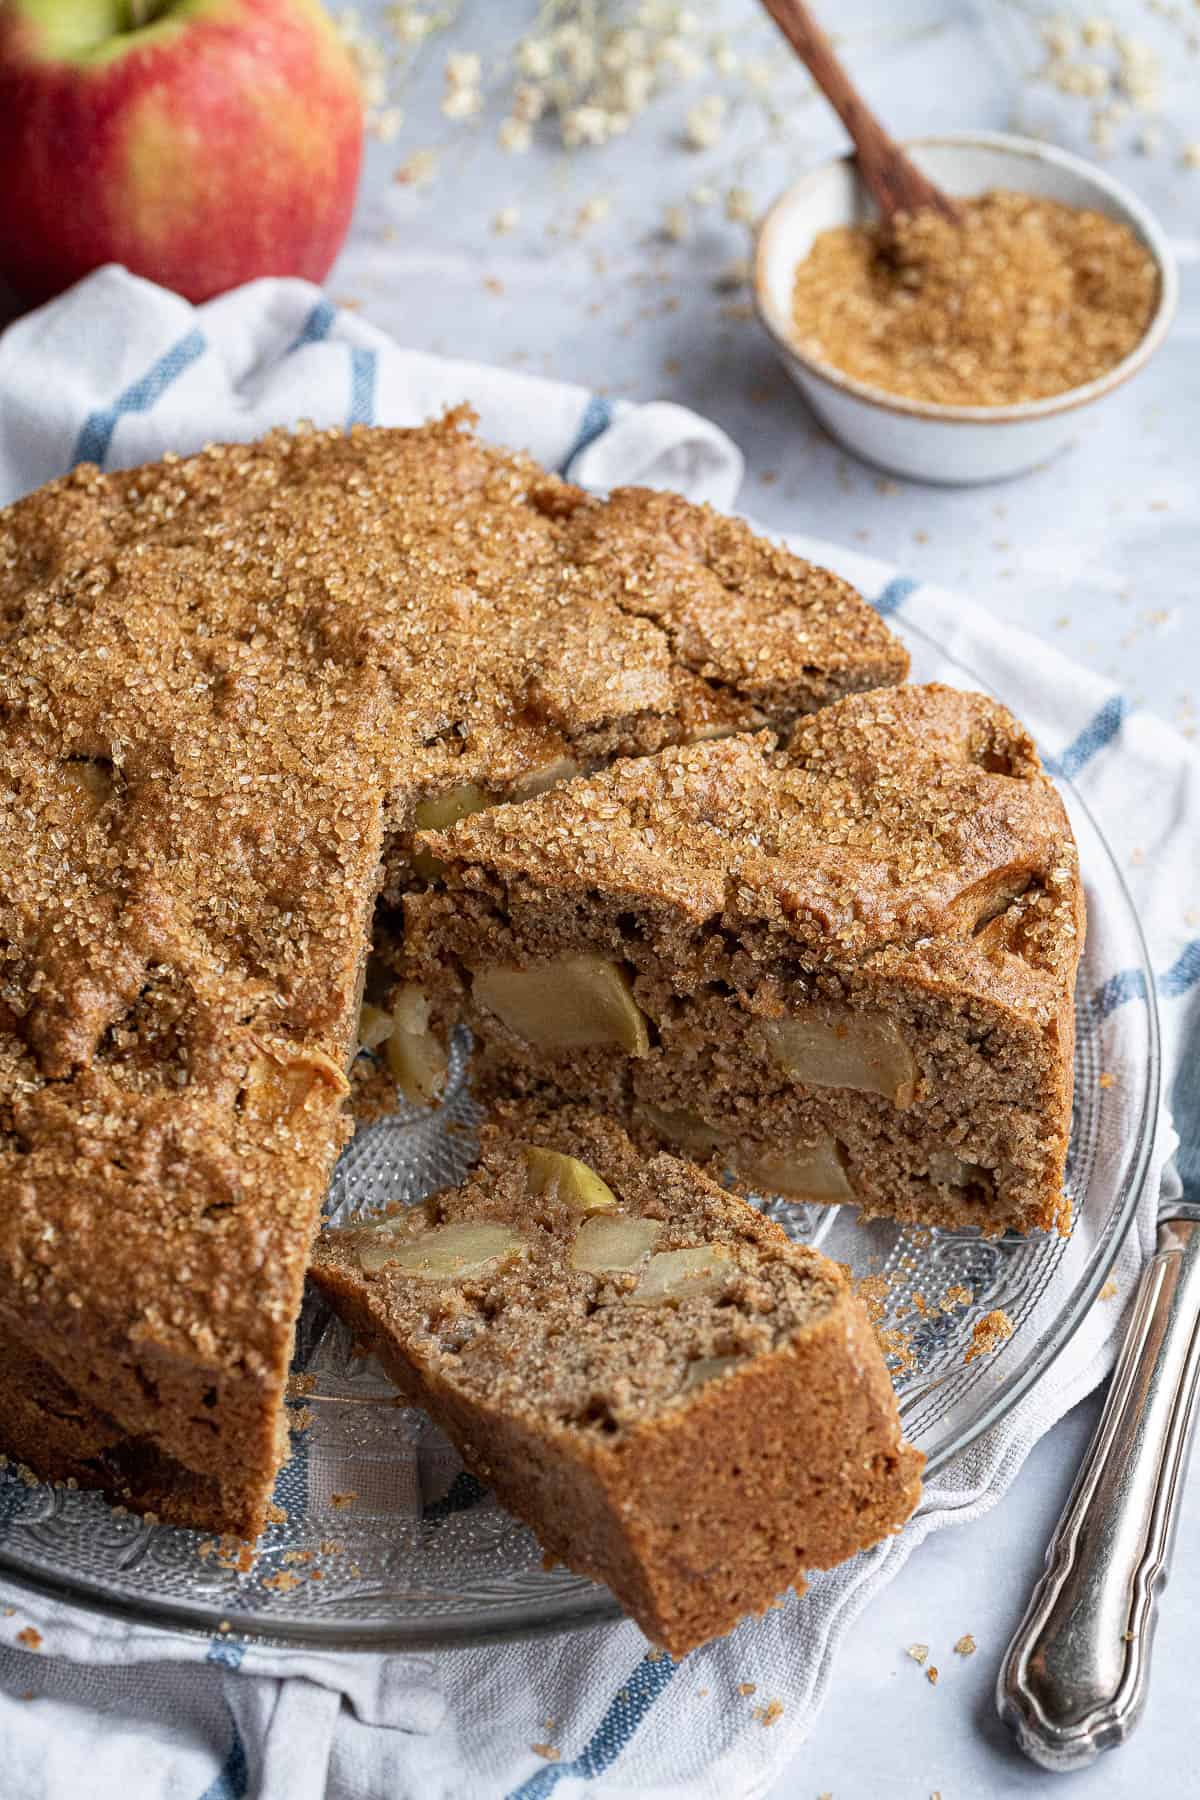 Close up of the sliced apple cake.